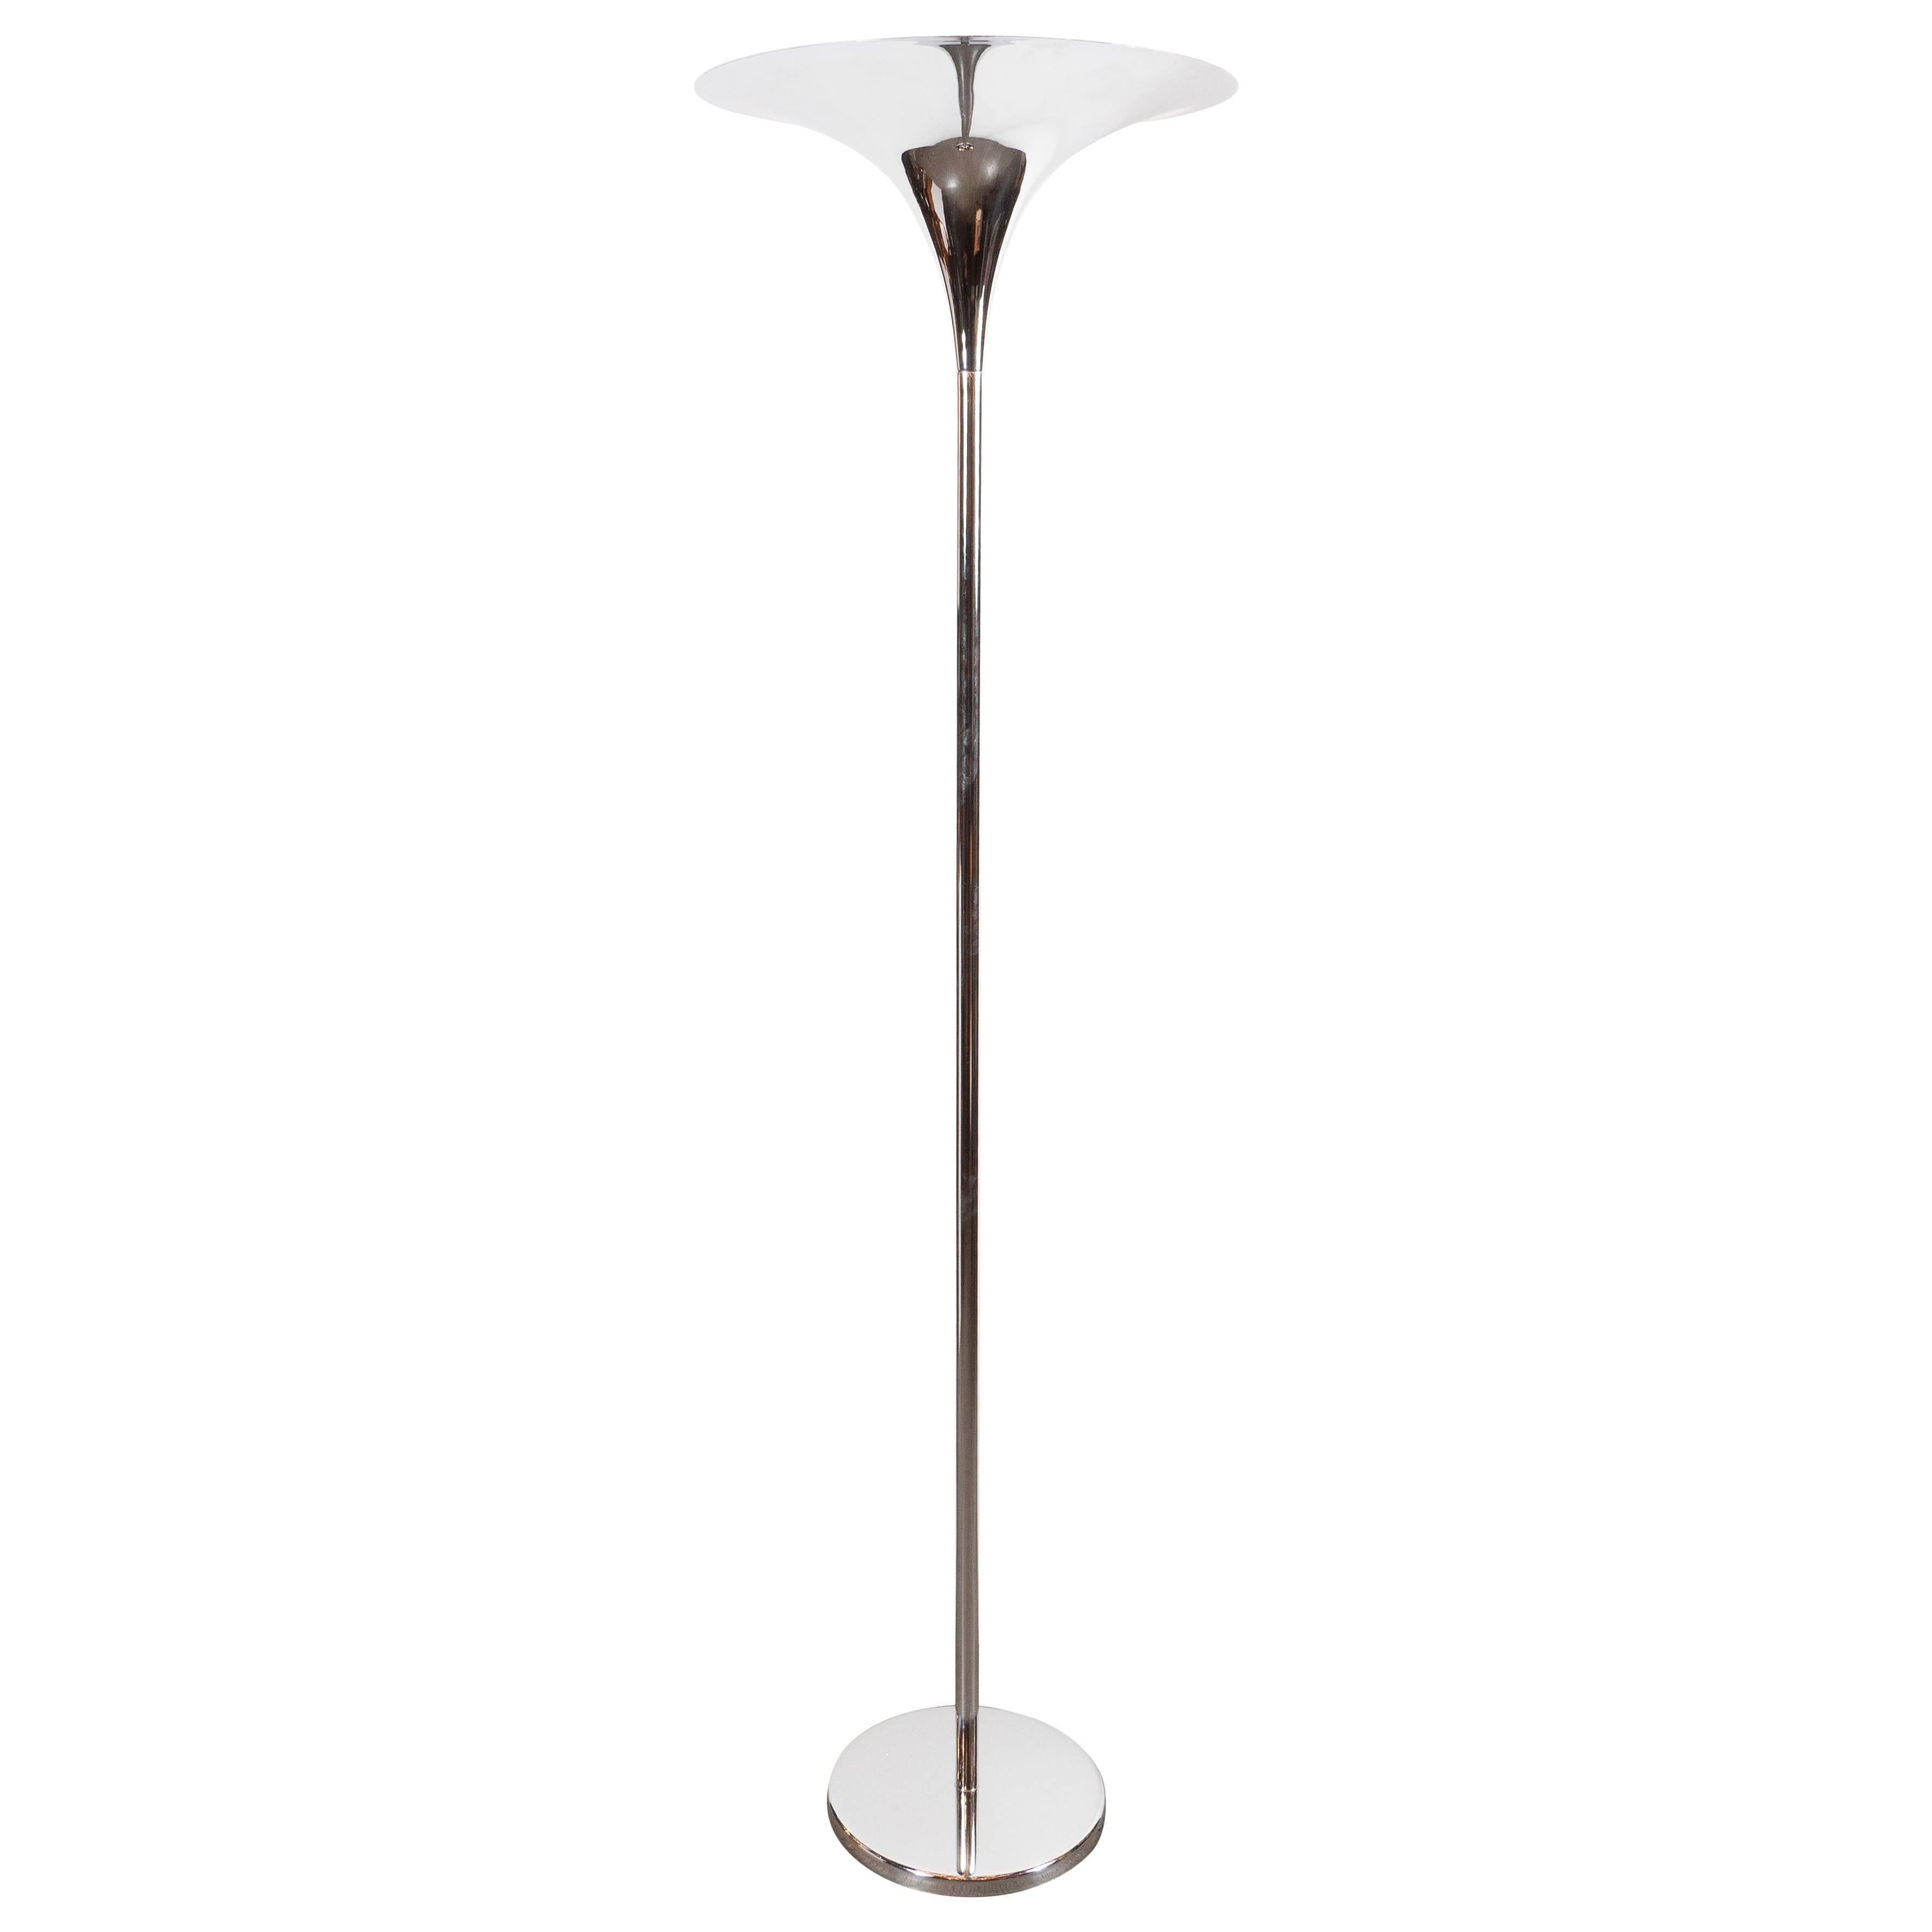 Mid-Century Modern Curvilinear and Sculptural Tulip Lamp in Lustrous Chrome